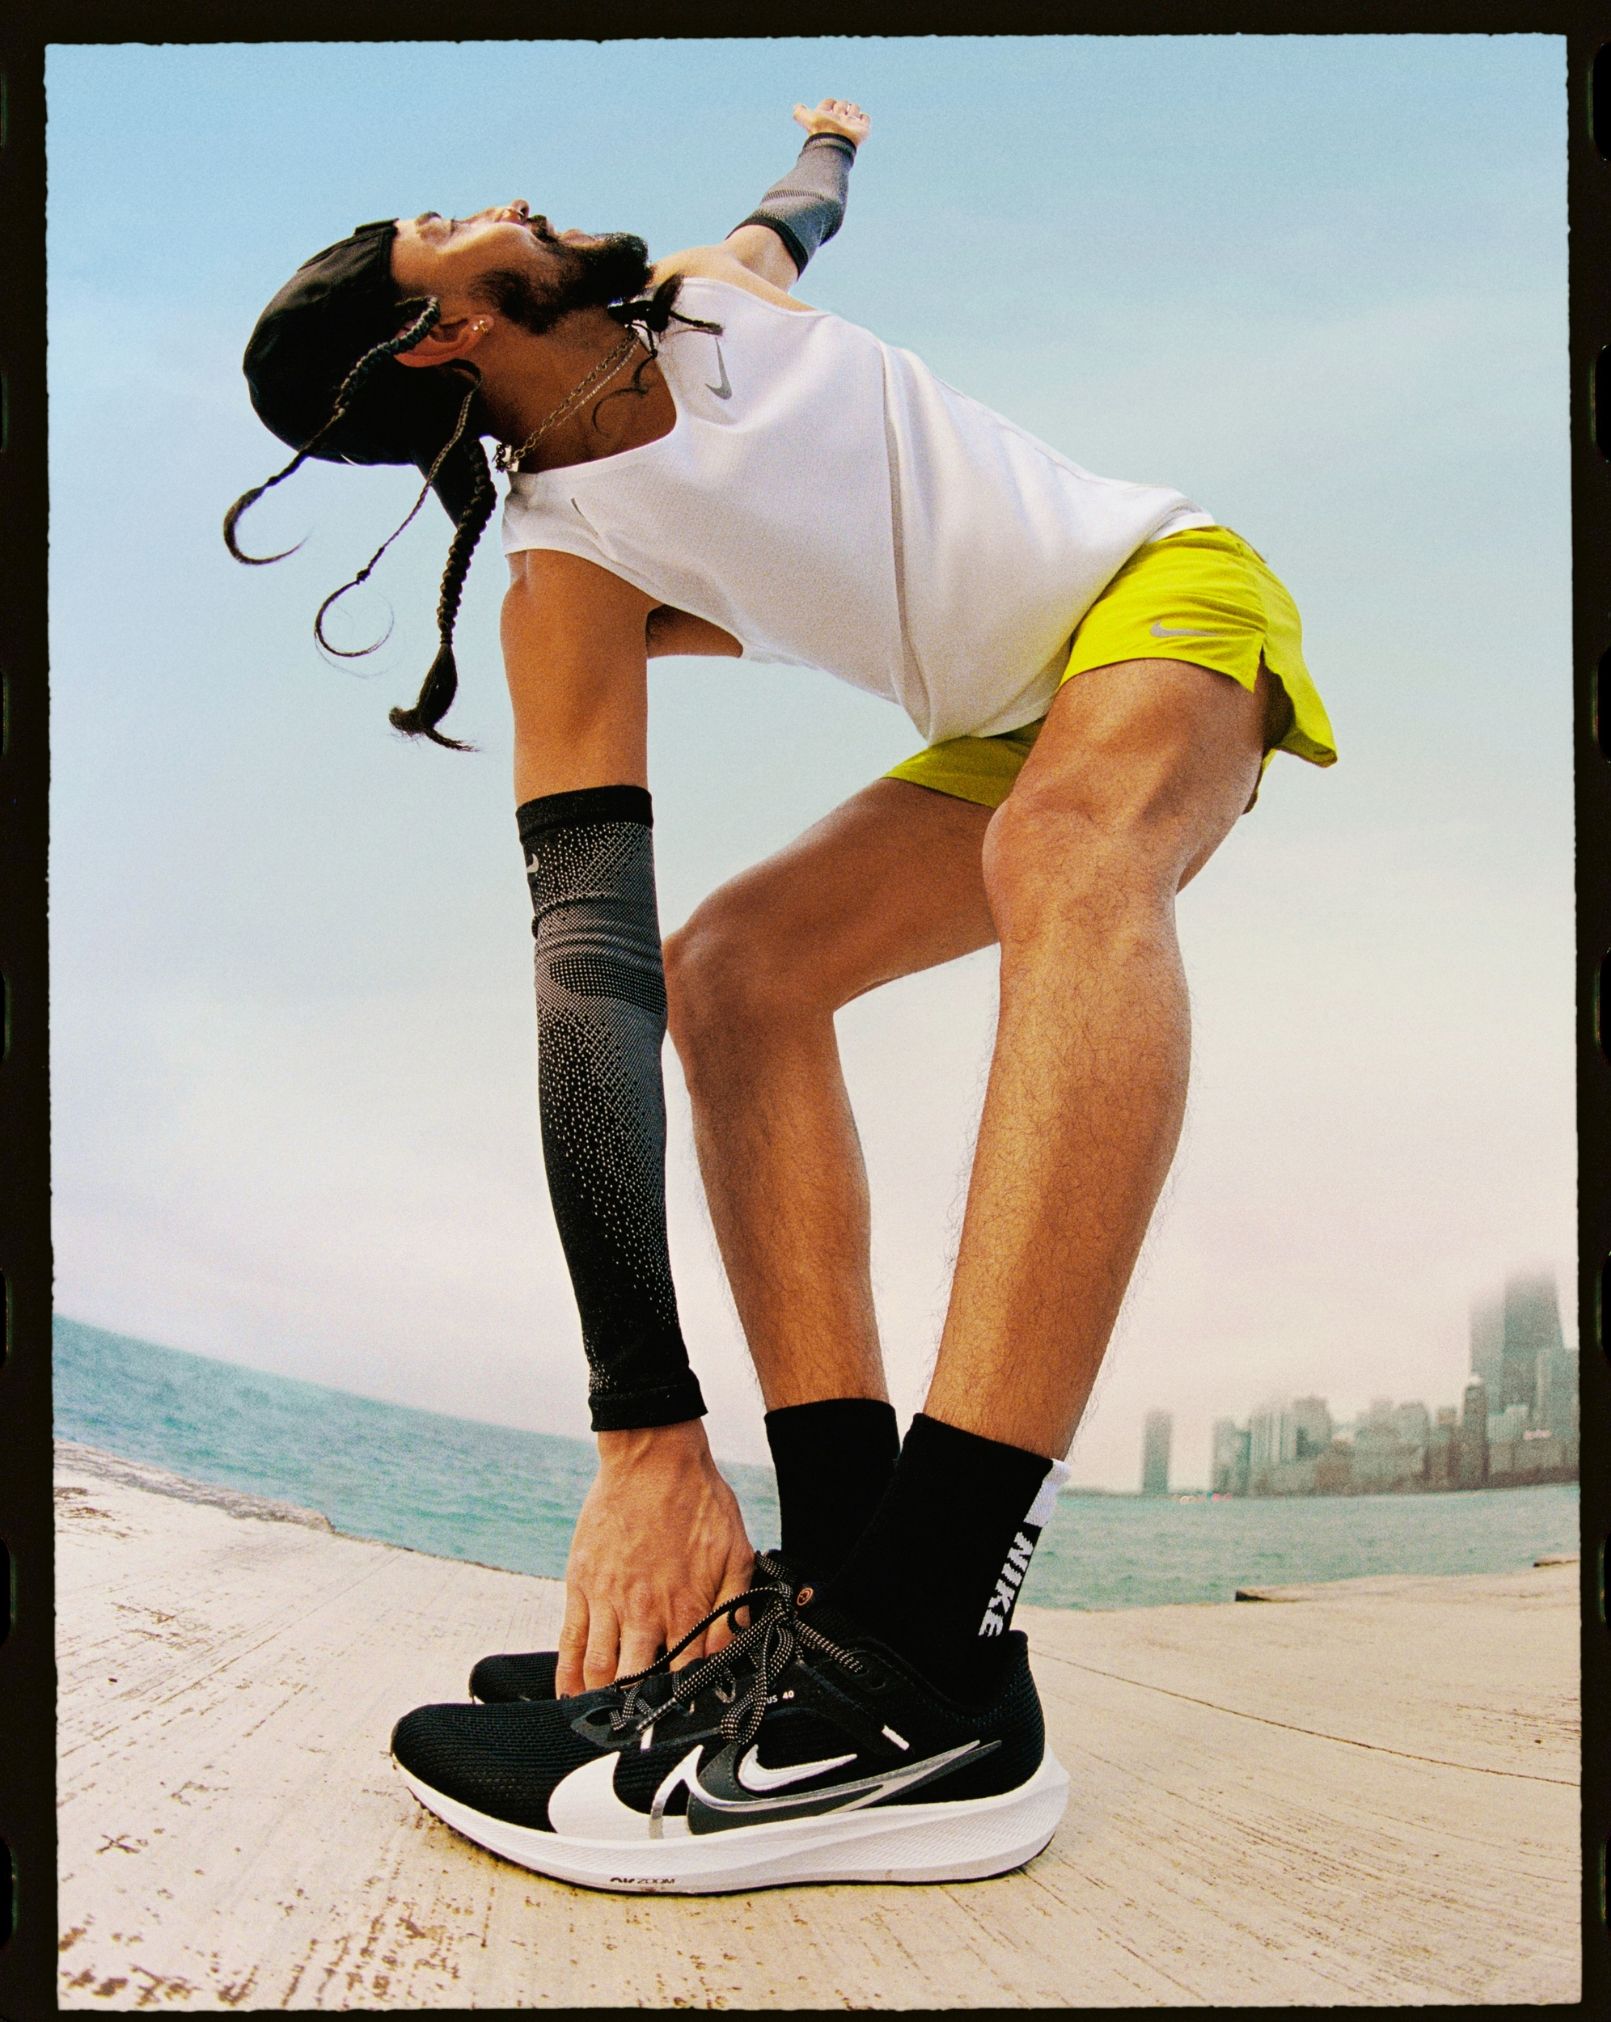 Man doing standing side angle stretch getting ready to run. Has two braids, beard, arm warmers, white tank, green shorts and black nike pegasus running shoes. He is on a dock in front of a body of water with cityscape on other side